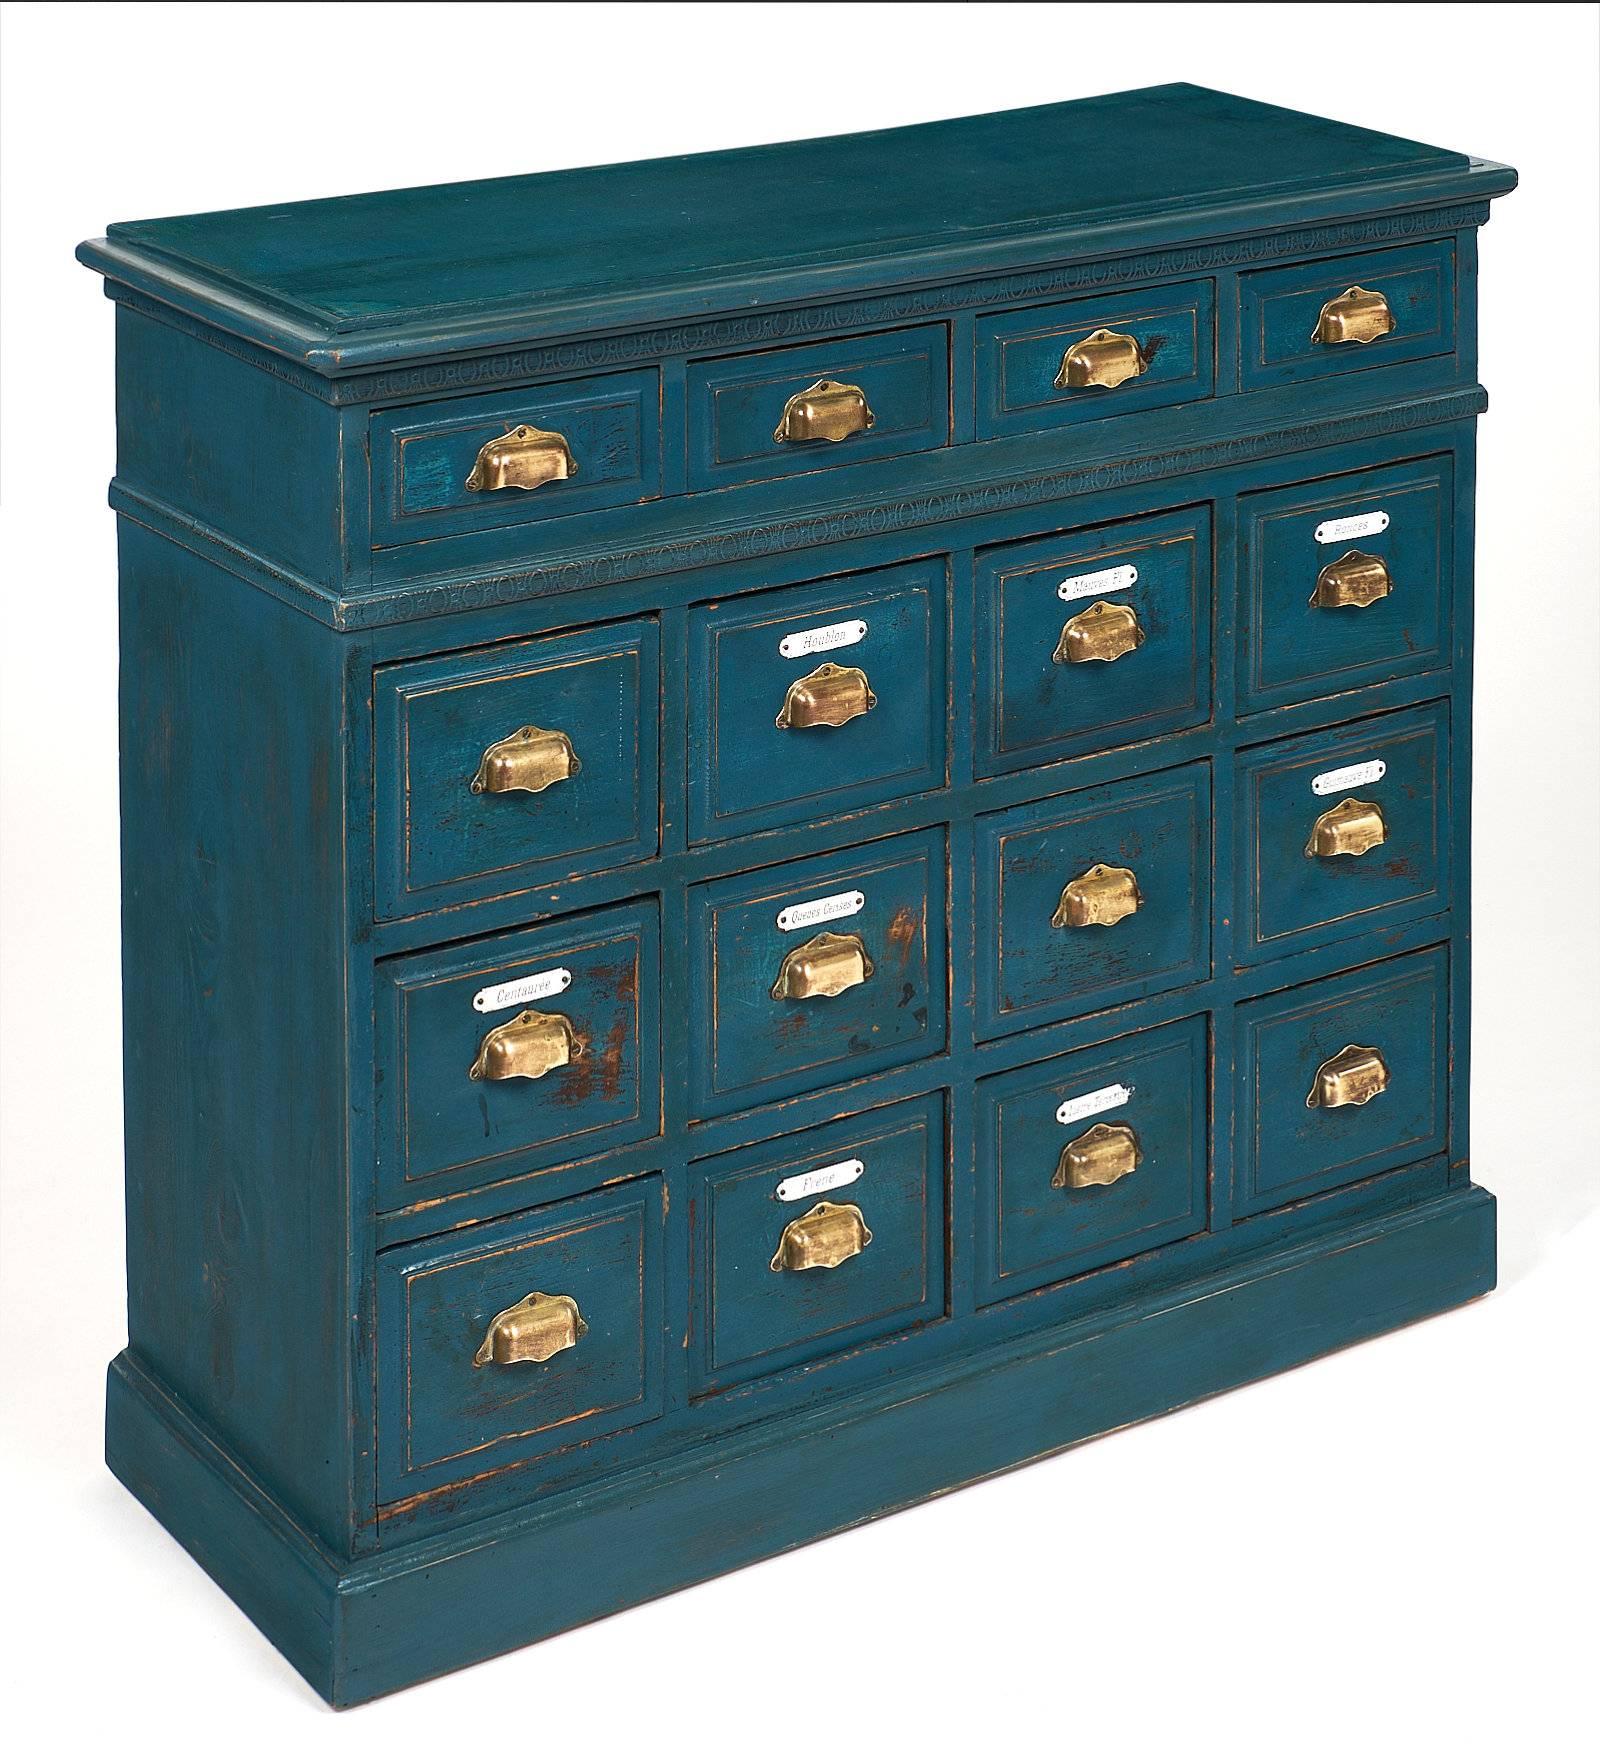 All original antique apothecary cabinet with 16 dovetailed drawers, made of fir. This piece has porcelain tags and solid brass handles. We love the great original teal blue color.